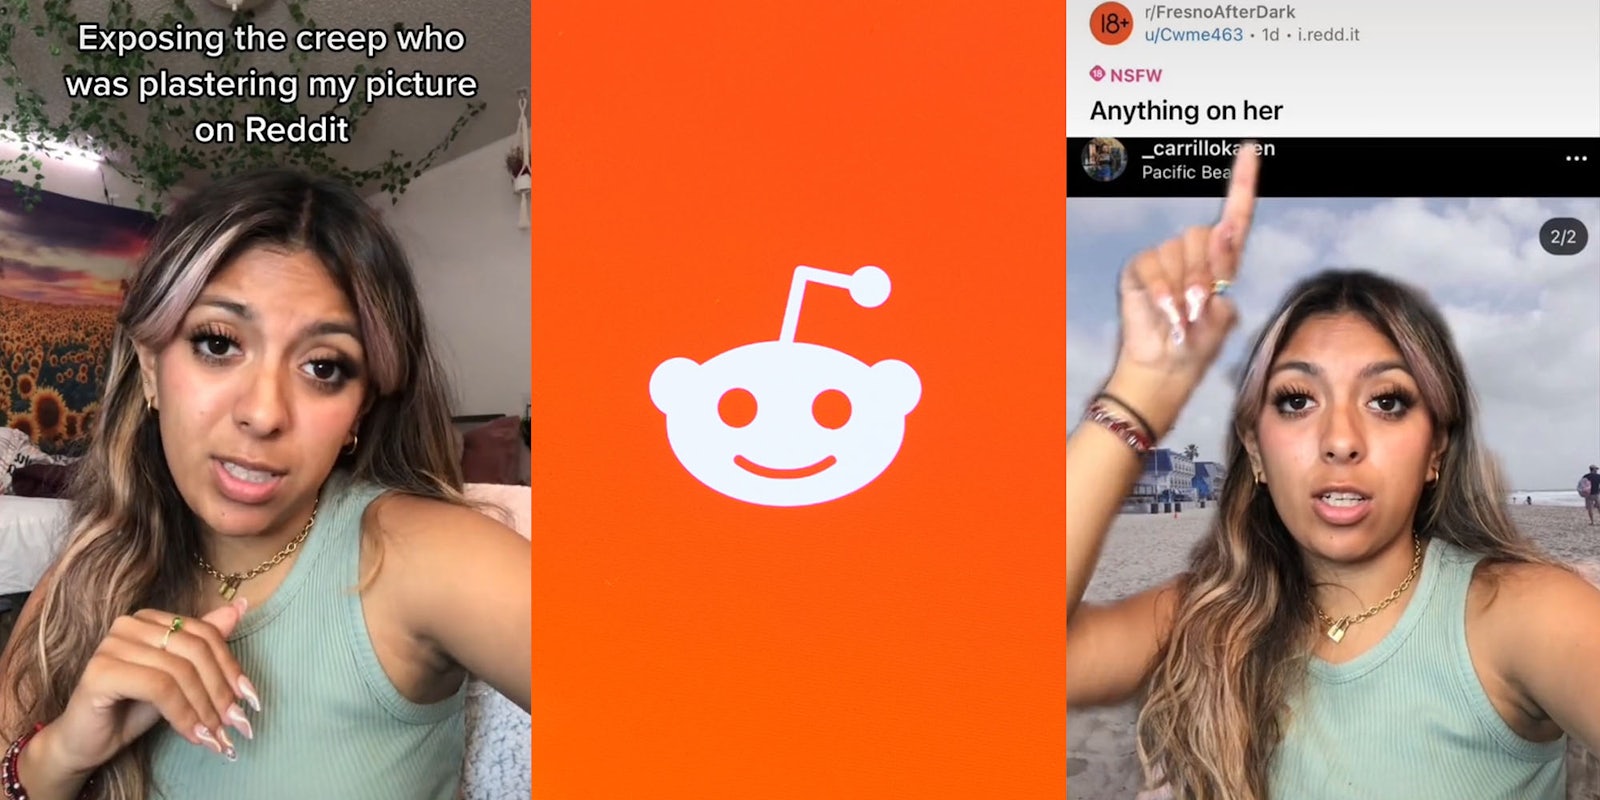 Woman talking in bedroom caption 'Exposing the creep who was plastering my picture on Reddit' (l) Reddit logo on orange background (c) woman greenscreen tiktok pointing finger over reddit post caption 'NSFW' 'anything on her' beach photo behind her (r)